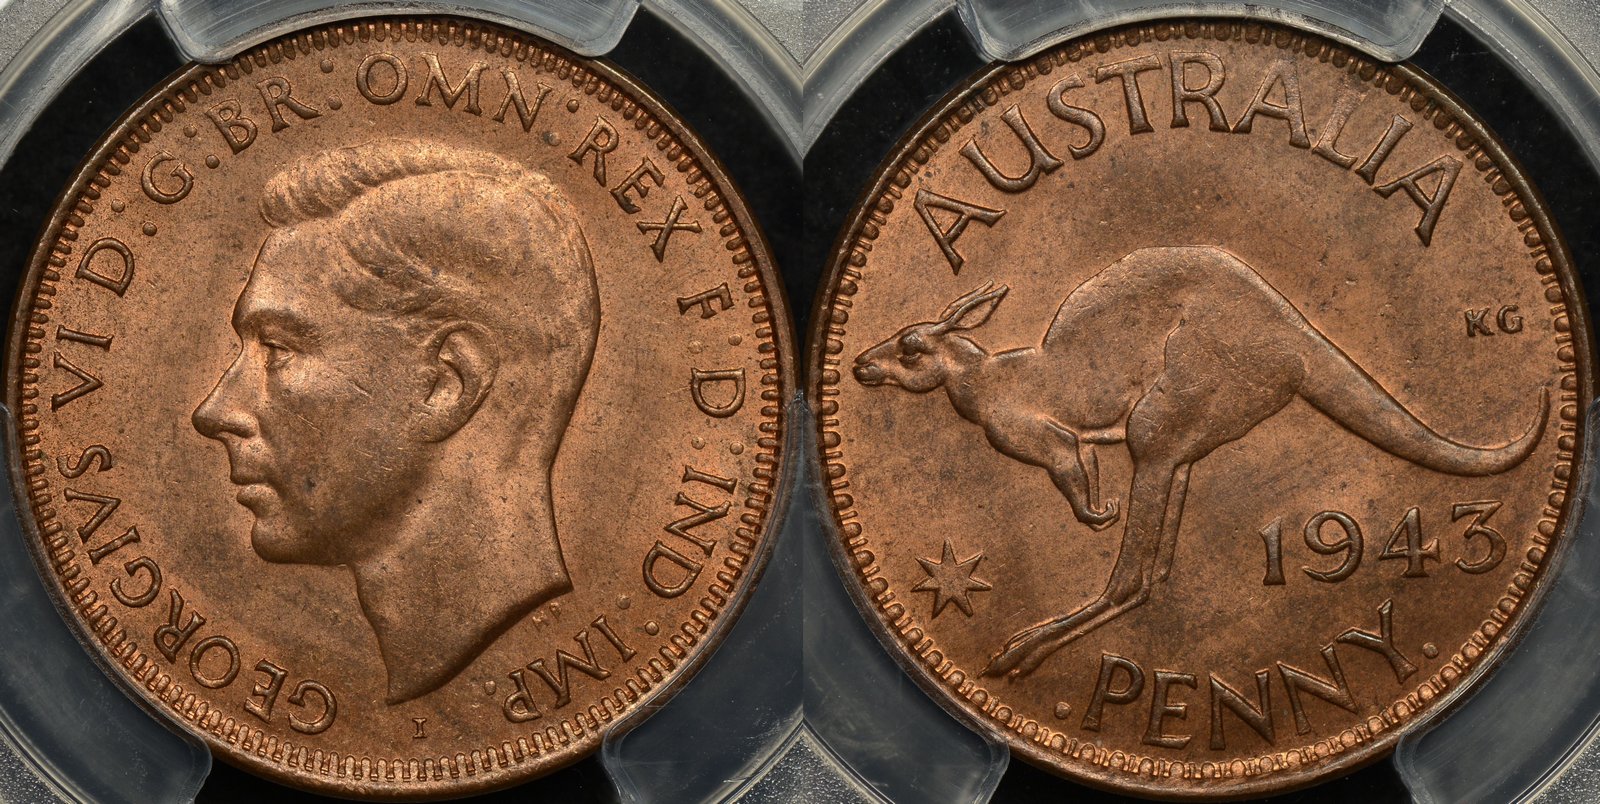 1943 Penny Value The Australian Coin Collecting Blog,Country Style Ribs Boneless